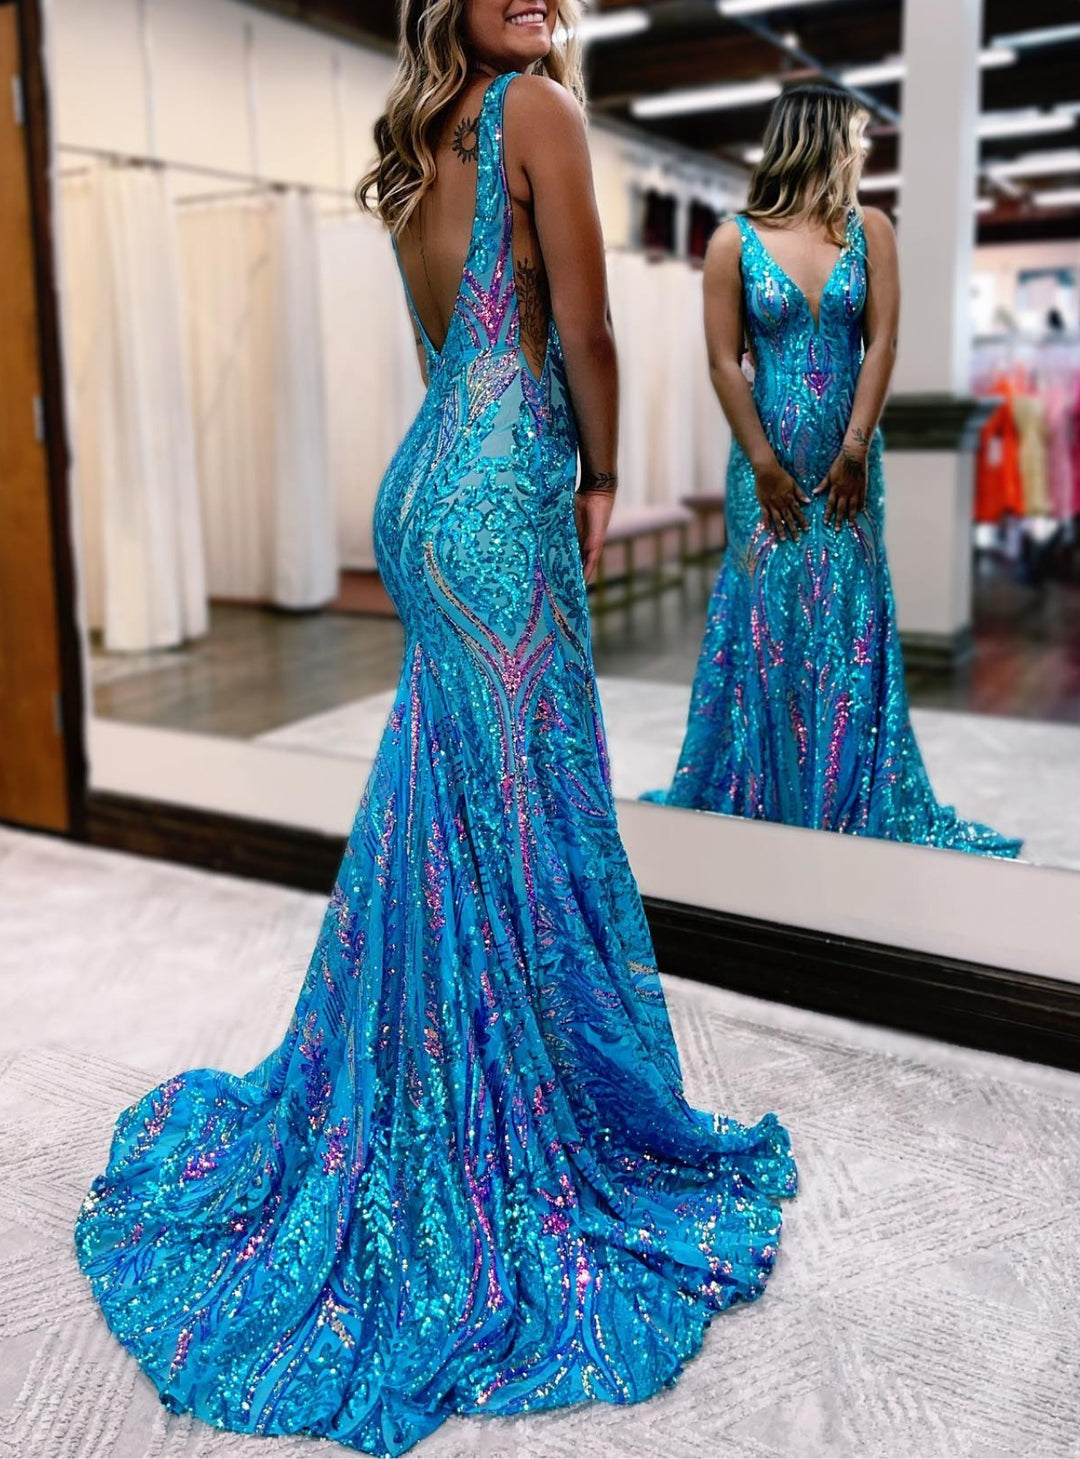 Trumpet/Mermaid V-Neck Sleeveless Floor-length Long Prom Floral Dresses with Sequins